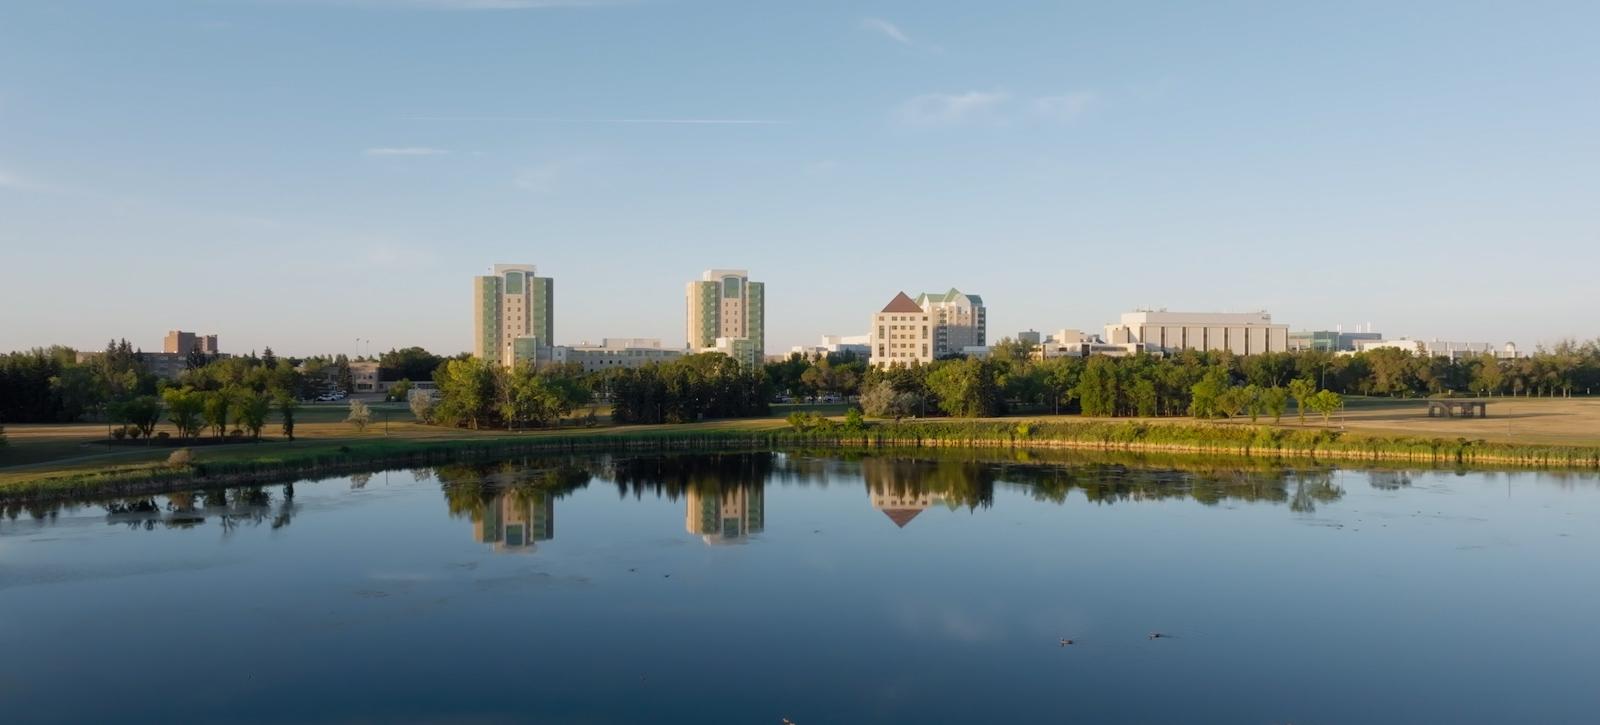 A view of the U of R and Wascana Lake